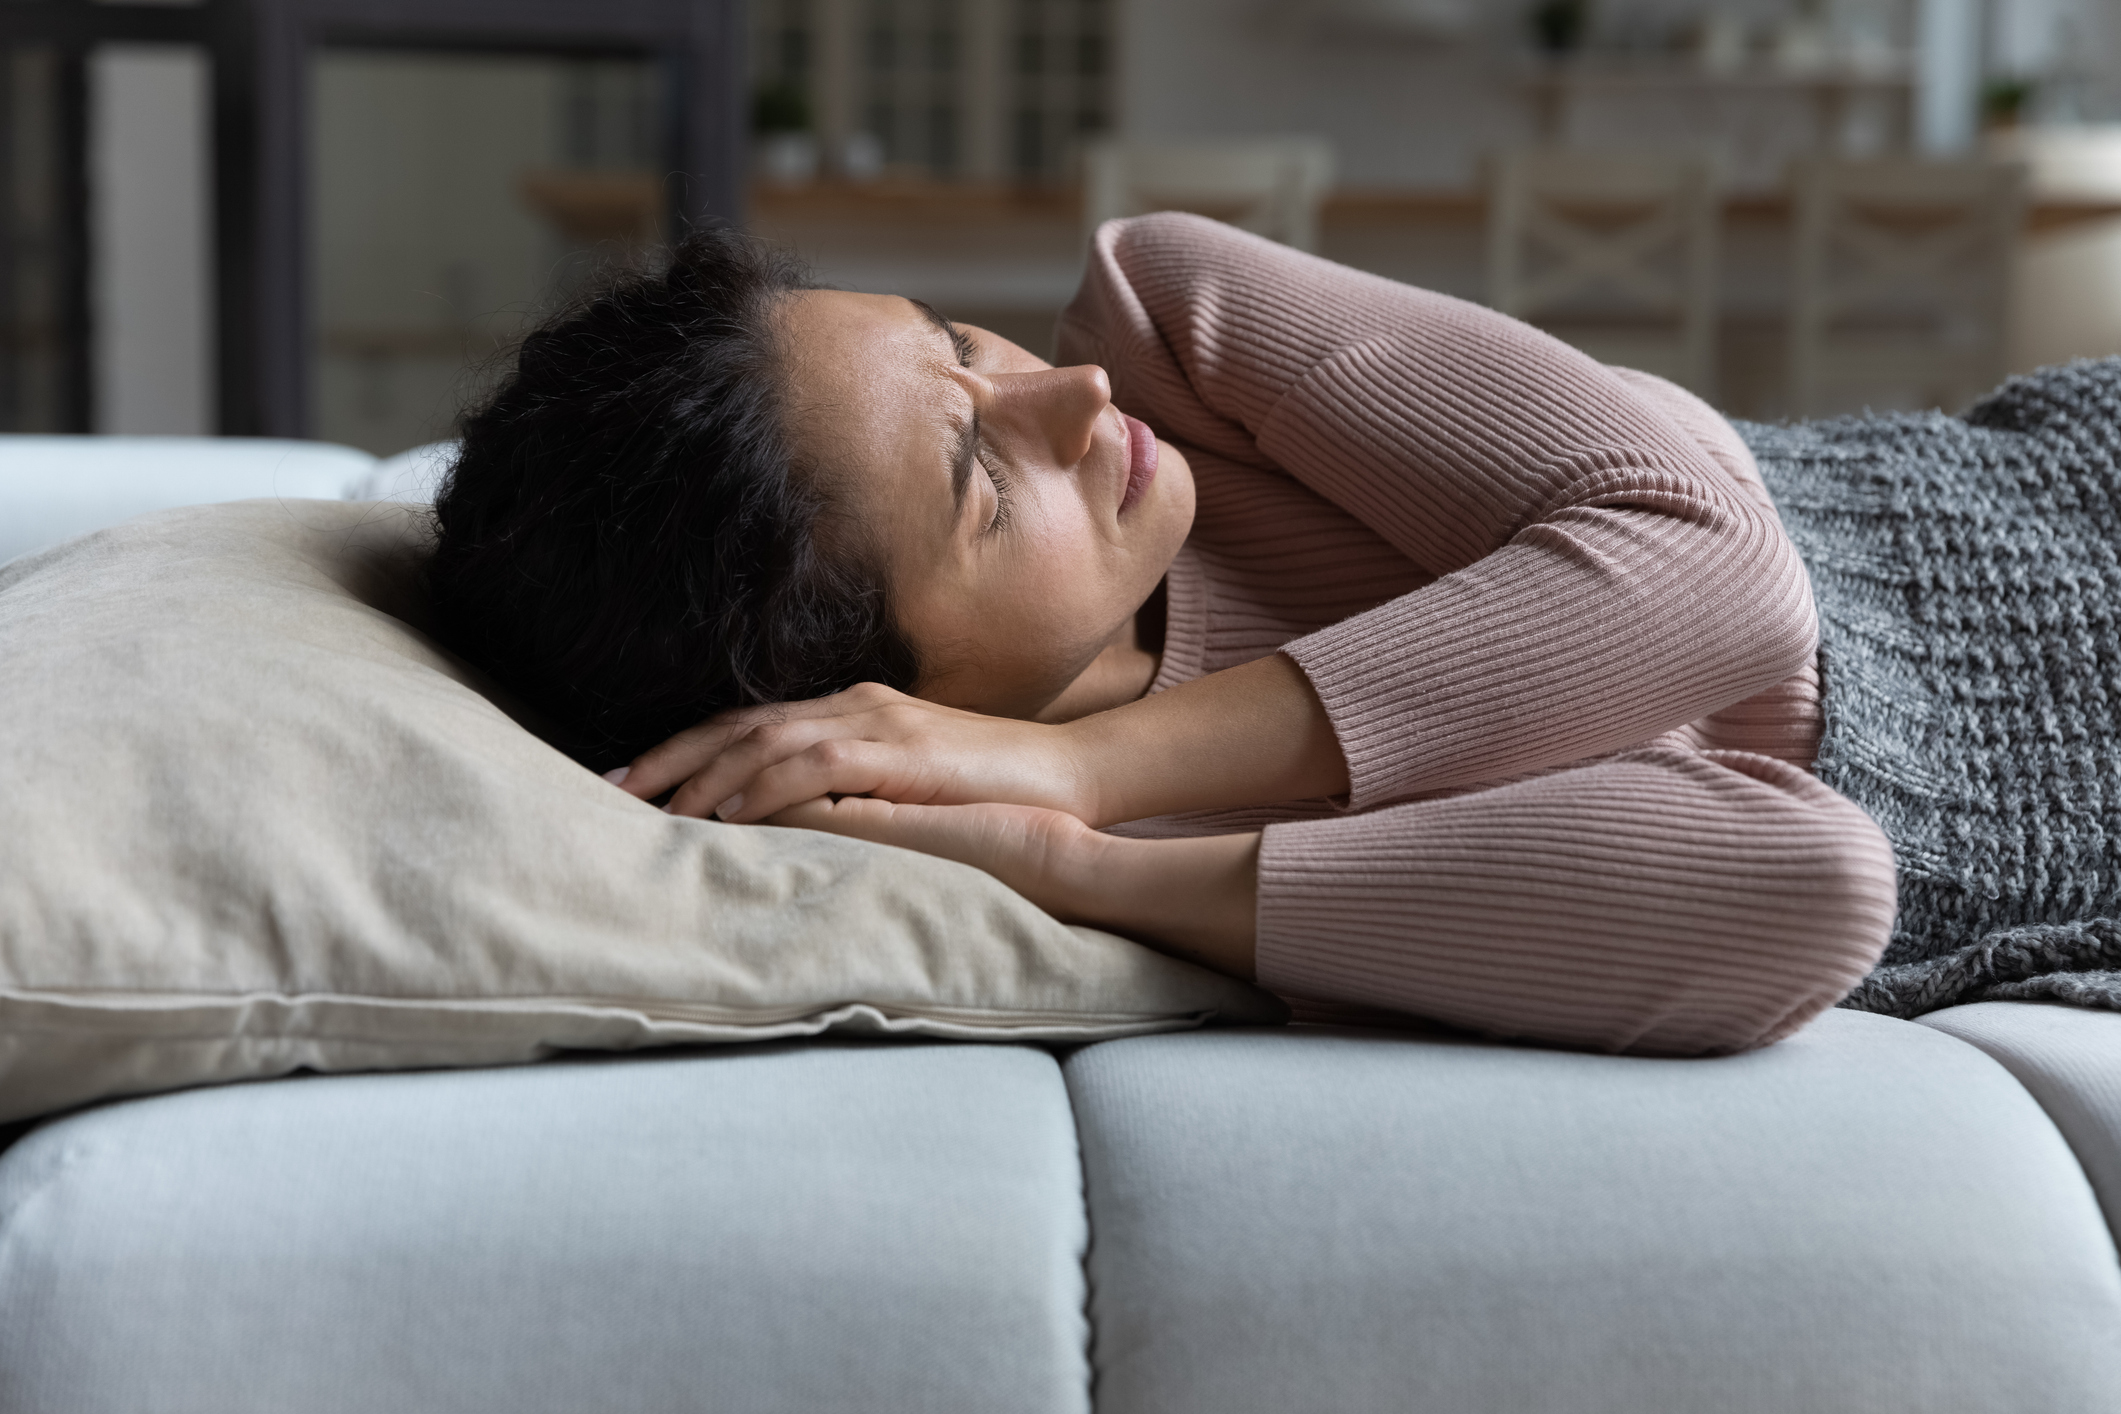 Unraveling the sleep connection to migraine